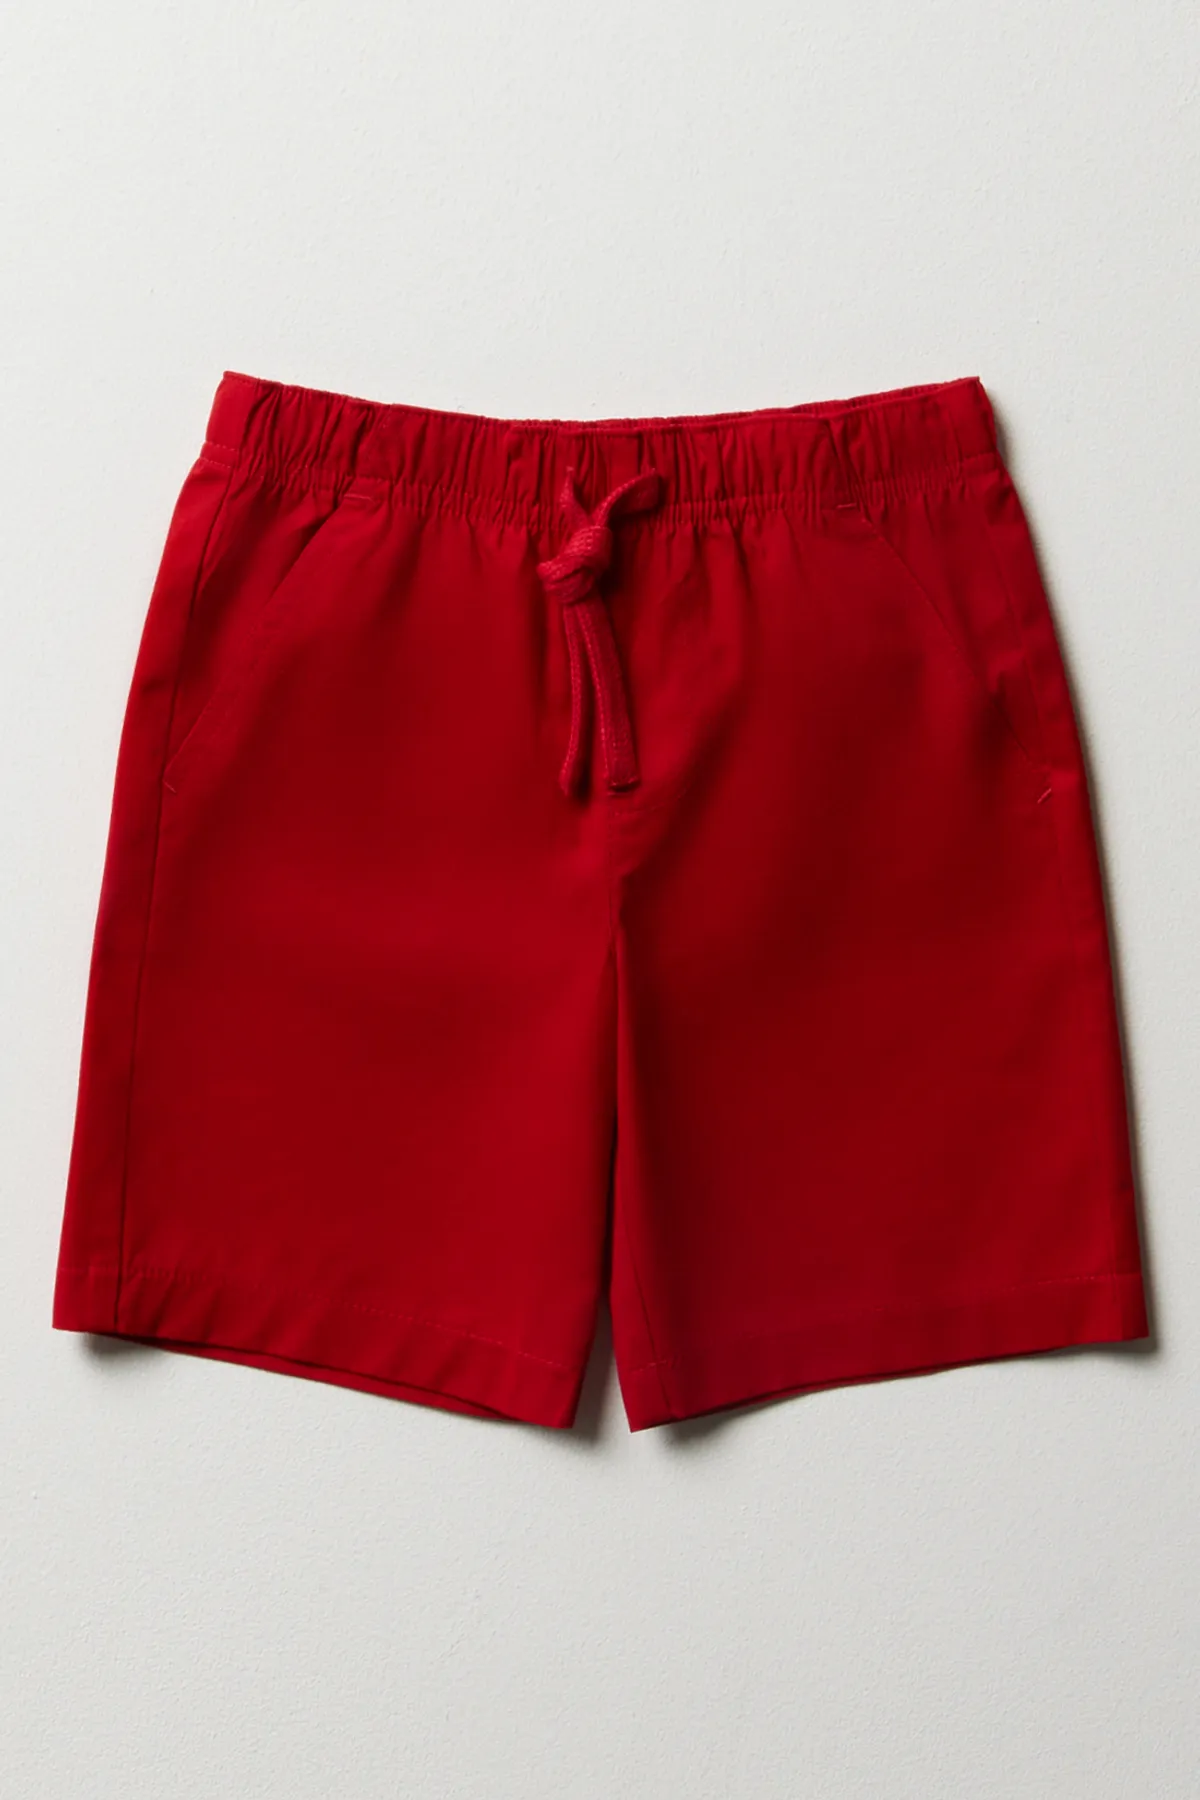 Shorts red - BOYS 2-10 YEARS Bottoms & Jeans